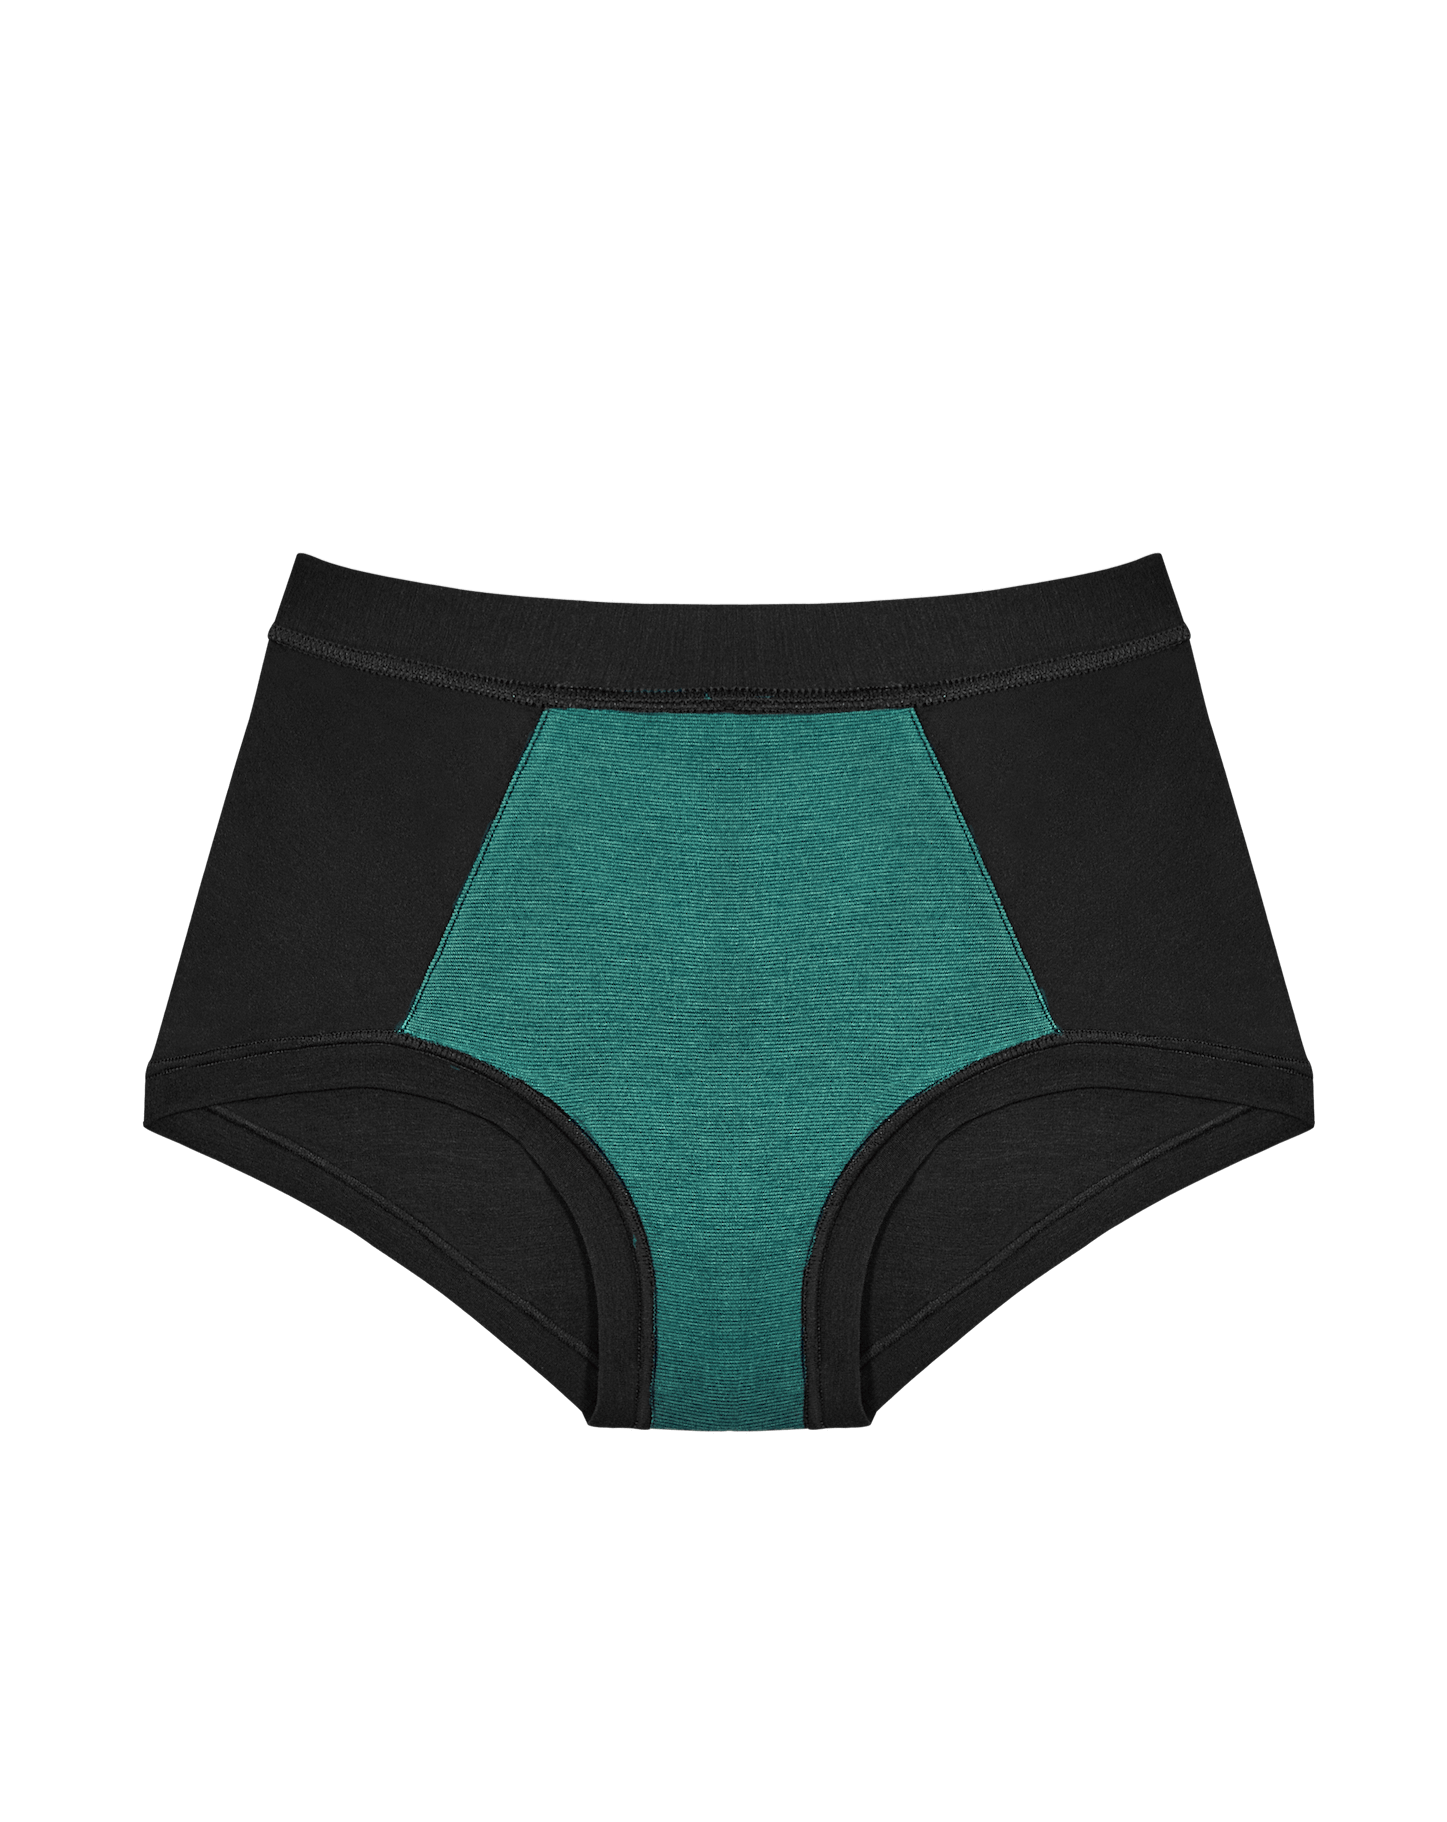 Underwear for Humanity - We offer a 10% discount to customers that